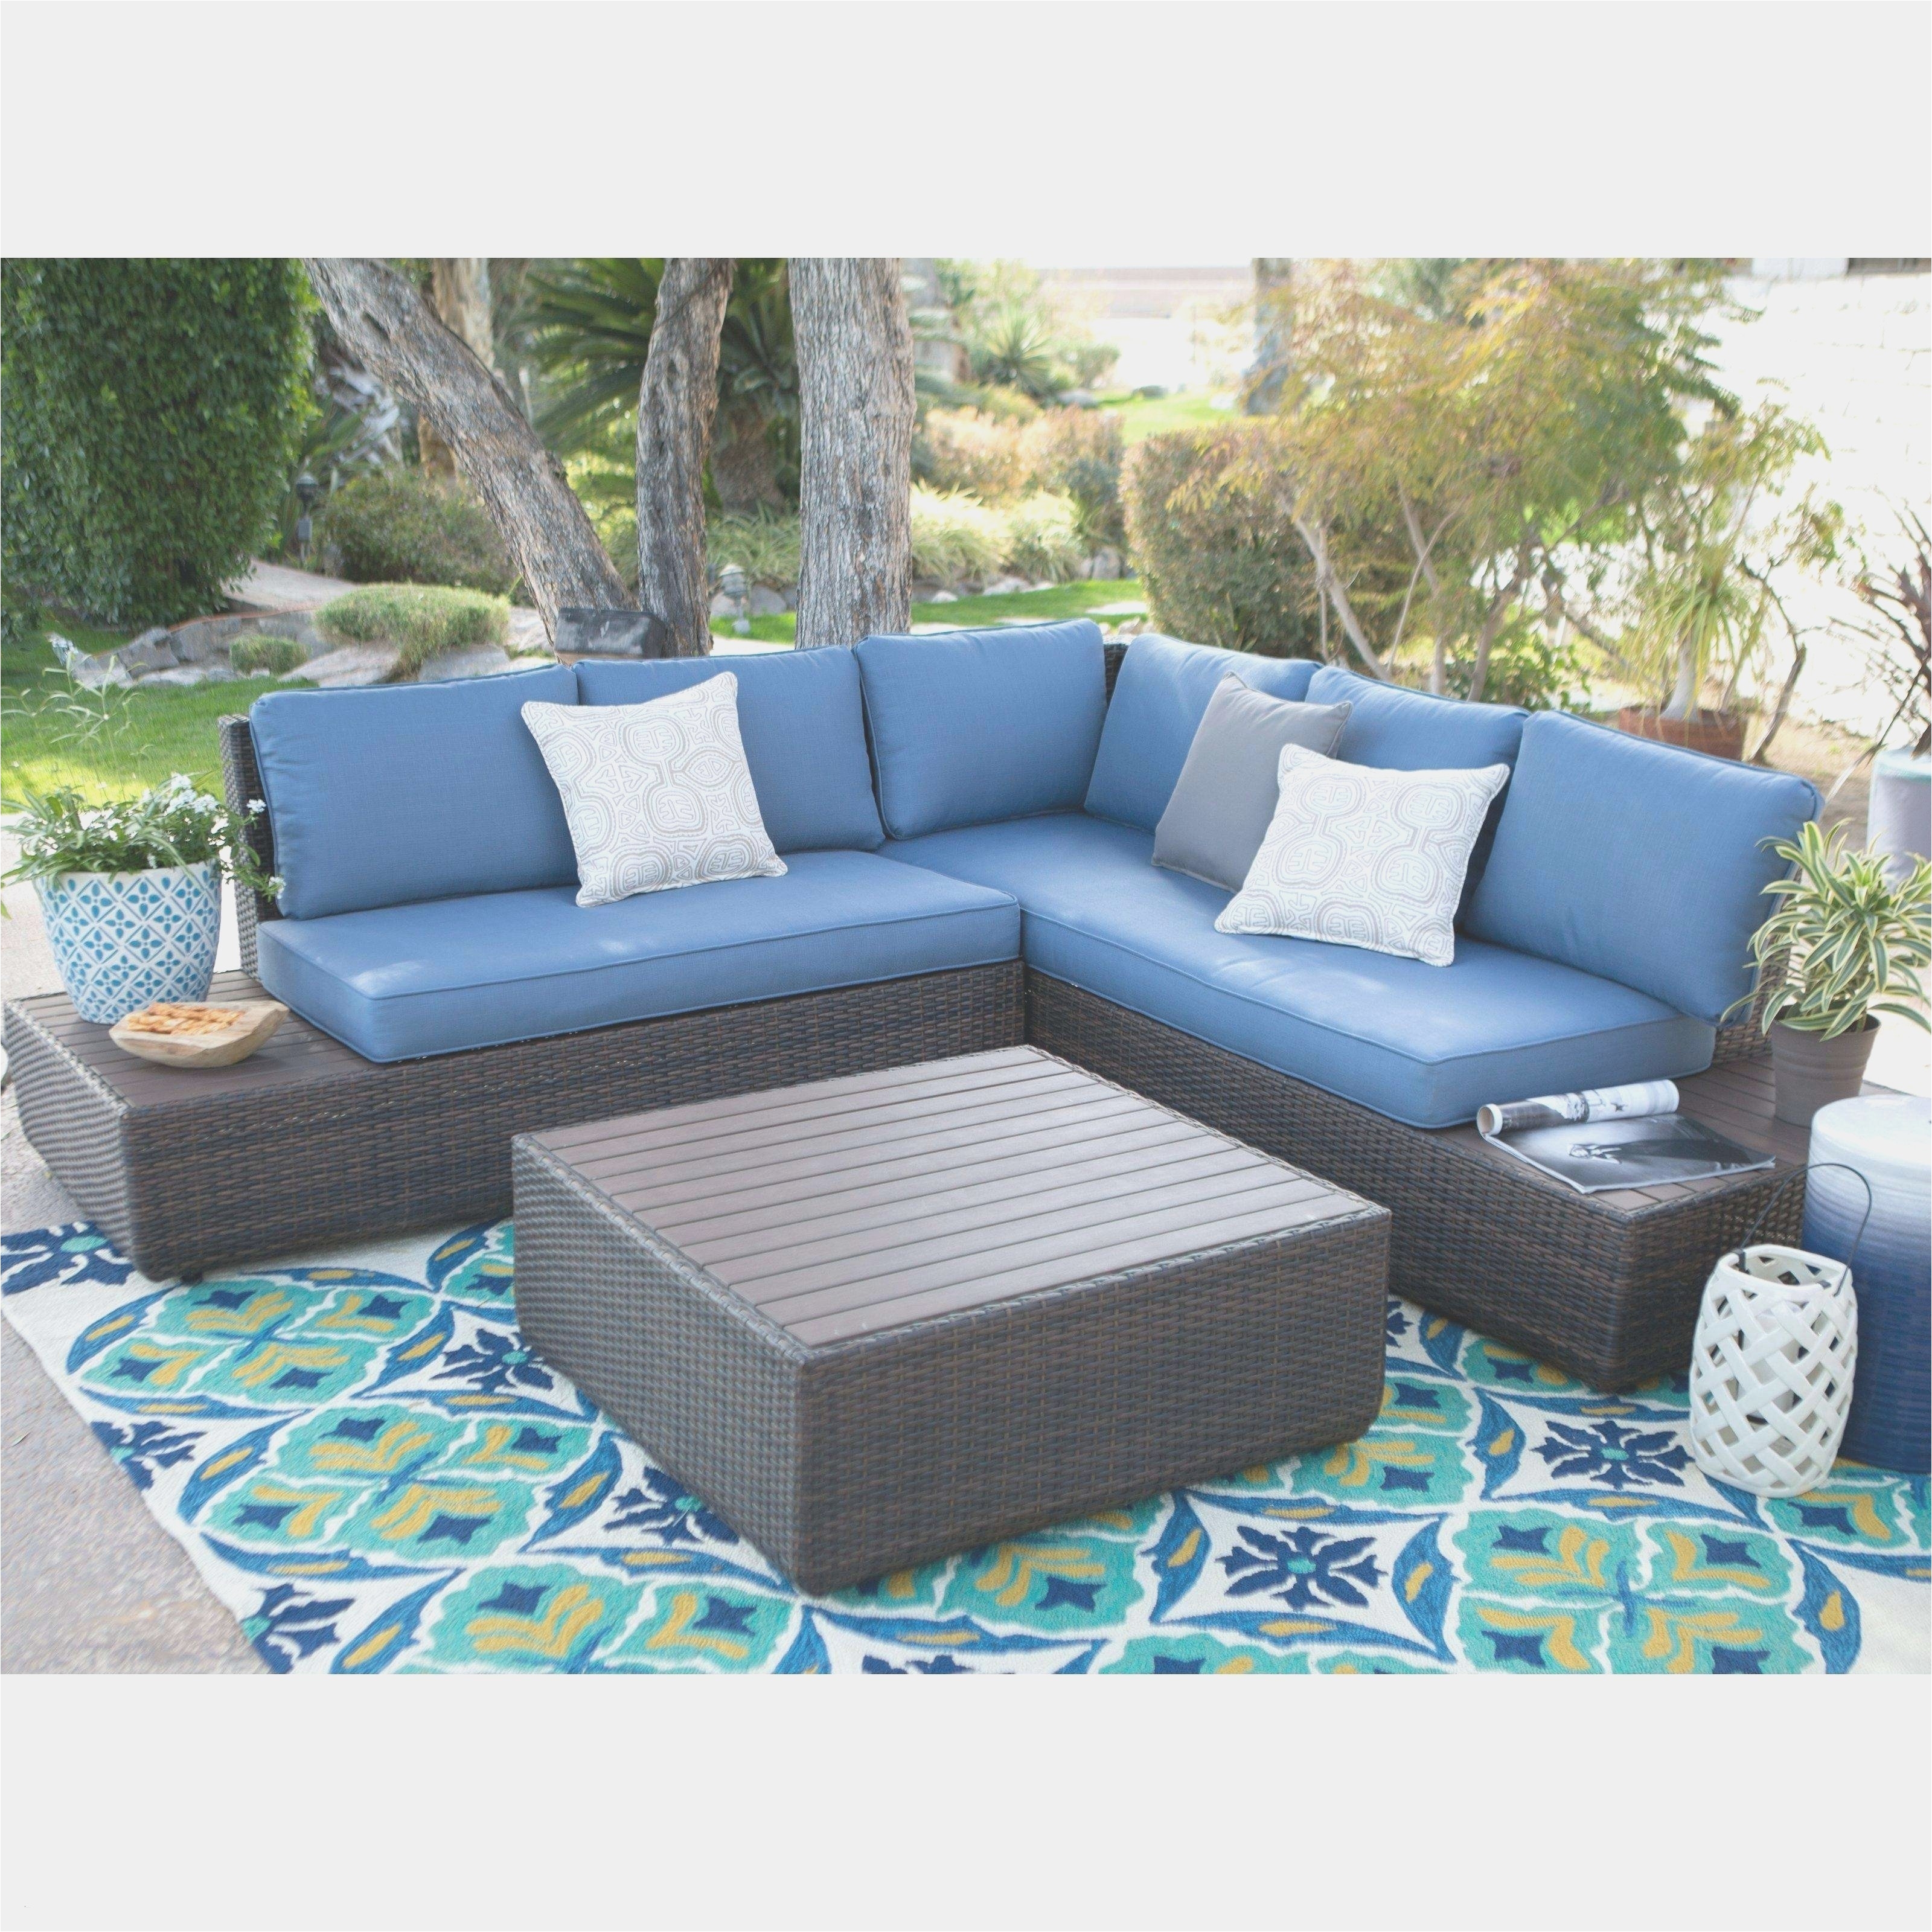 outdoor furniture chairs inspirational cheap outdoor patio furniture awesome outdoor sofa 0d patio chairs 31 best patio furniture stores near me